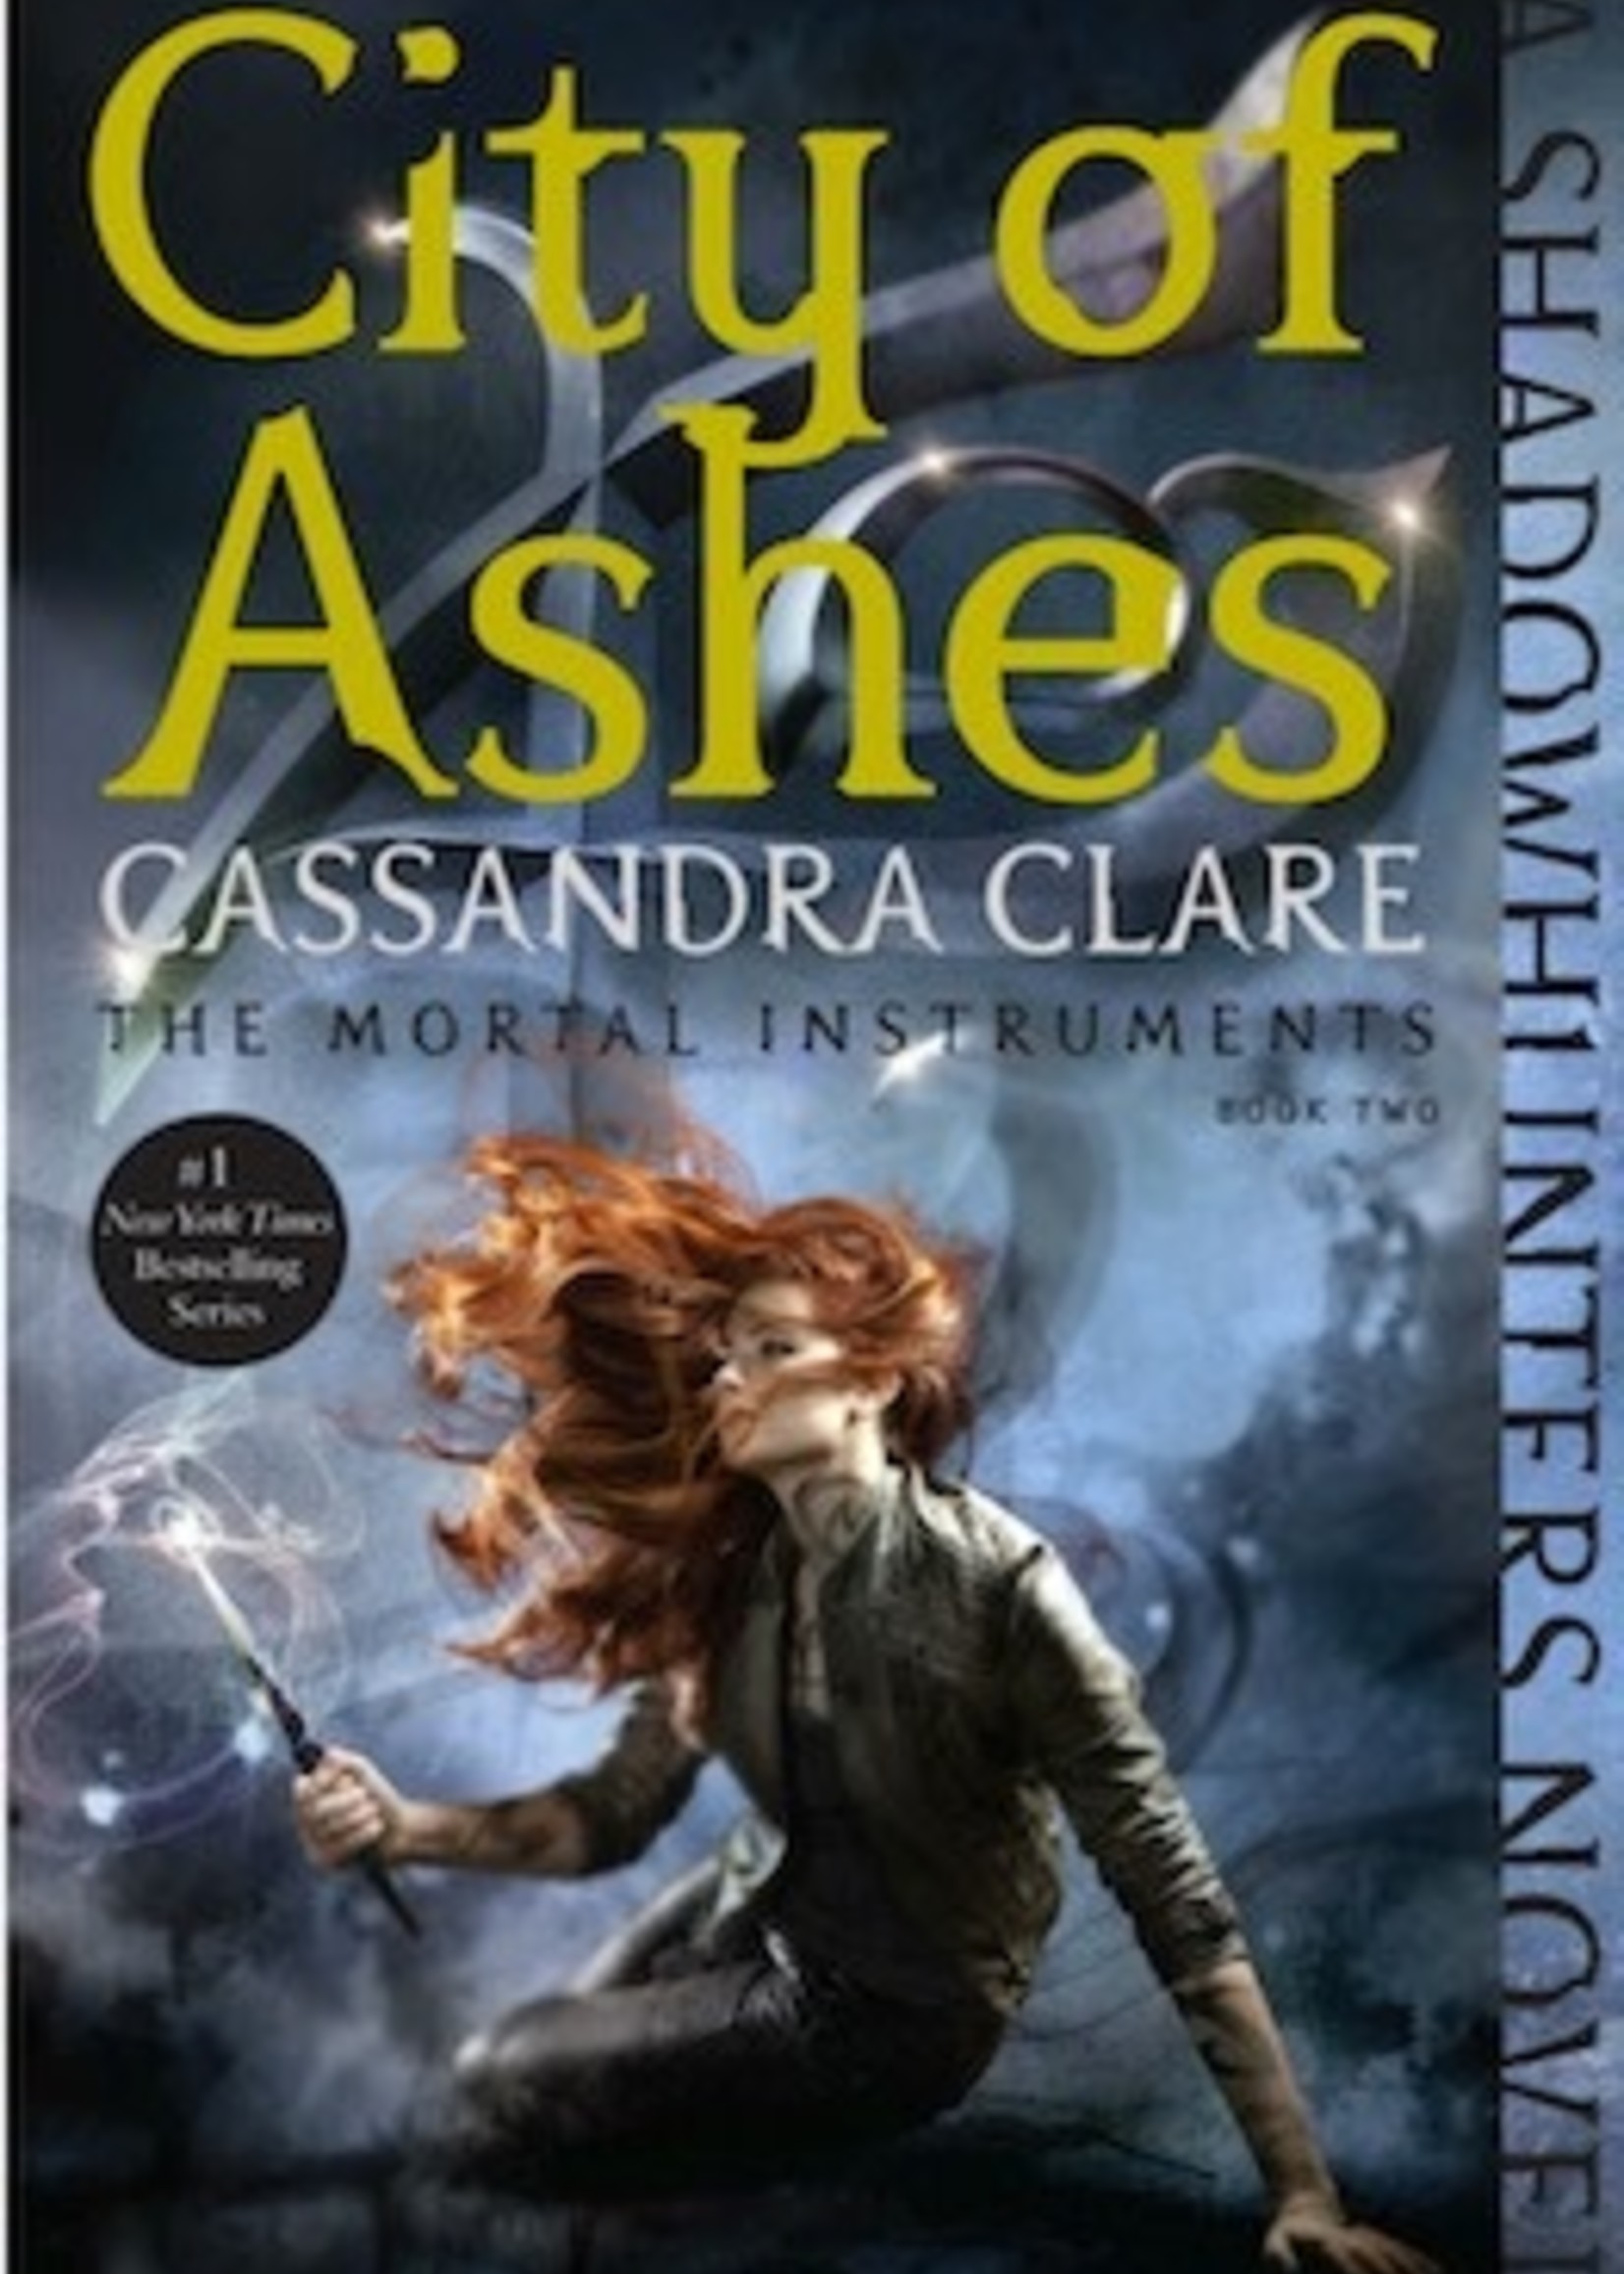 City of Ashes (The Mortal Instruments #2) by Cassandra Clare